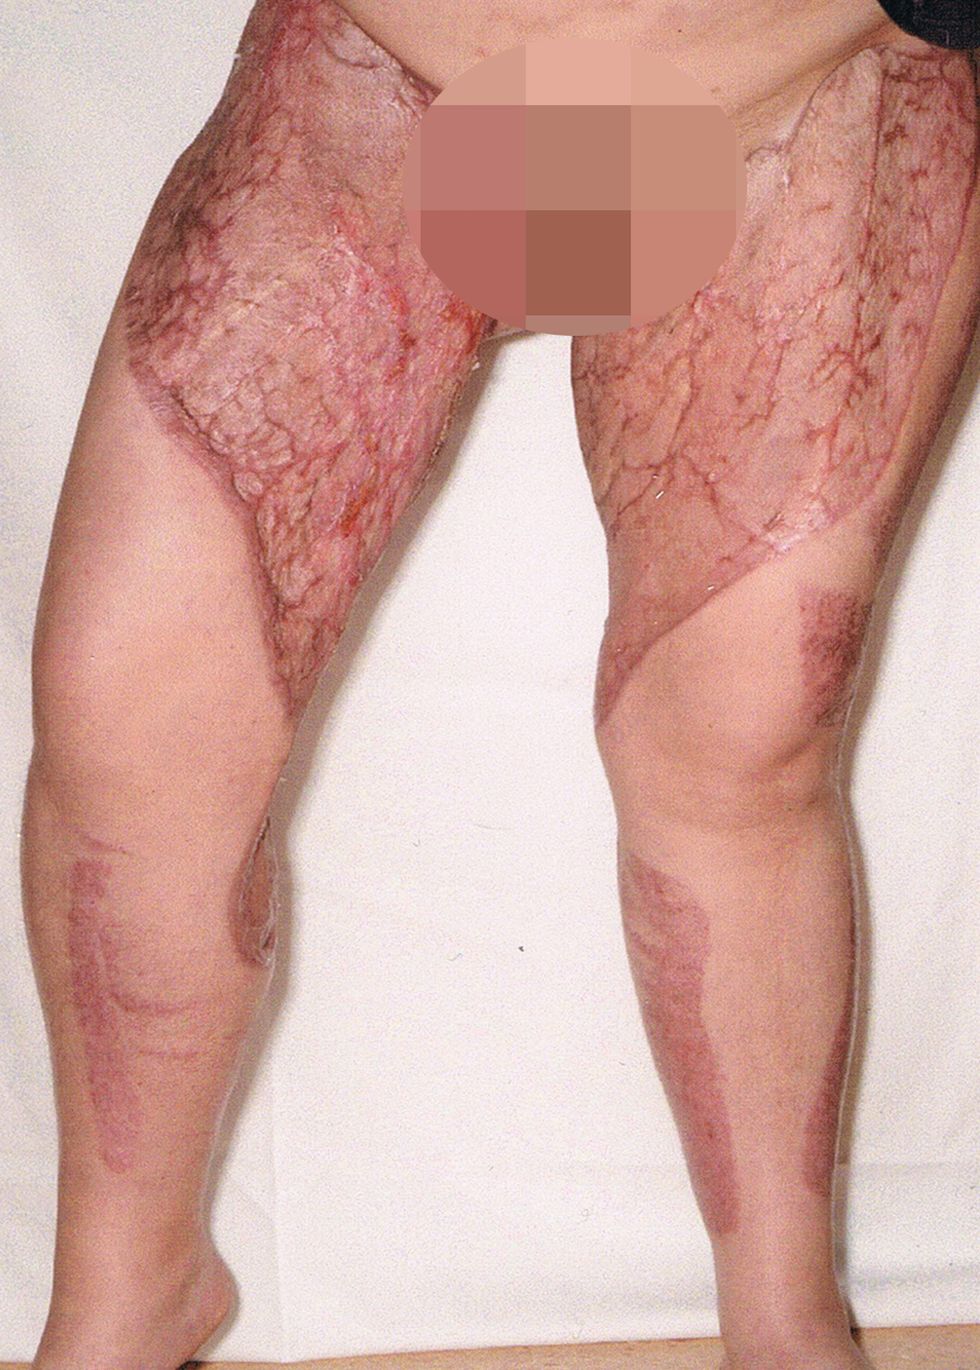 This woman developed a flesh-eating infection from her razor after